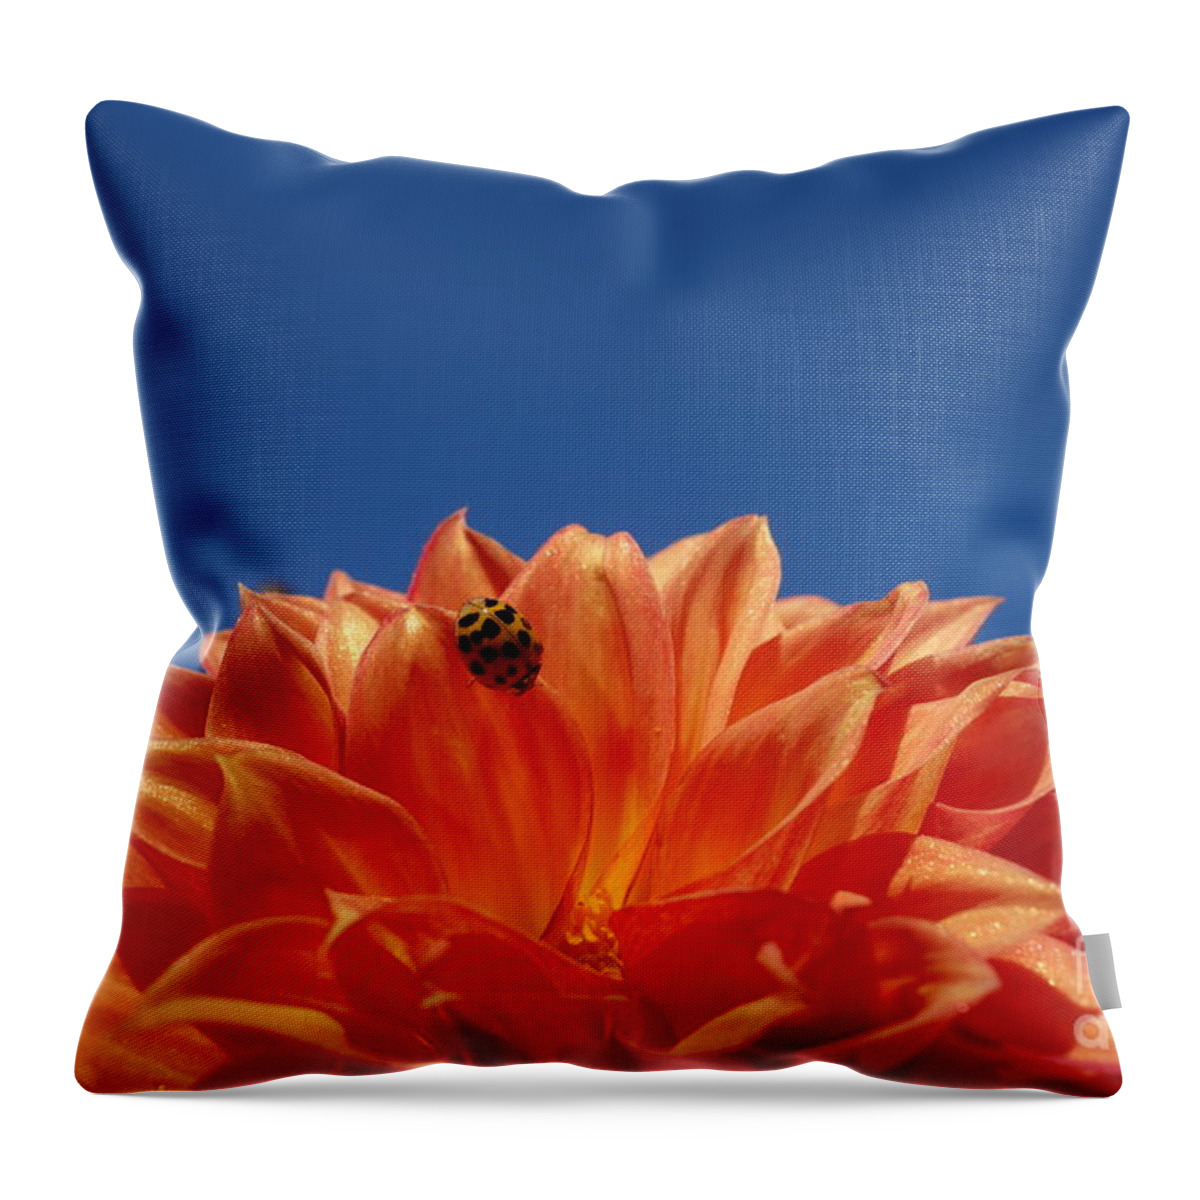 Petals For A Lady Throw Pillow featuring the photograph Petals for a Lady by Jacqueline Athmann